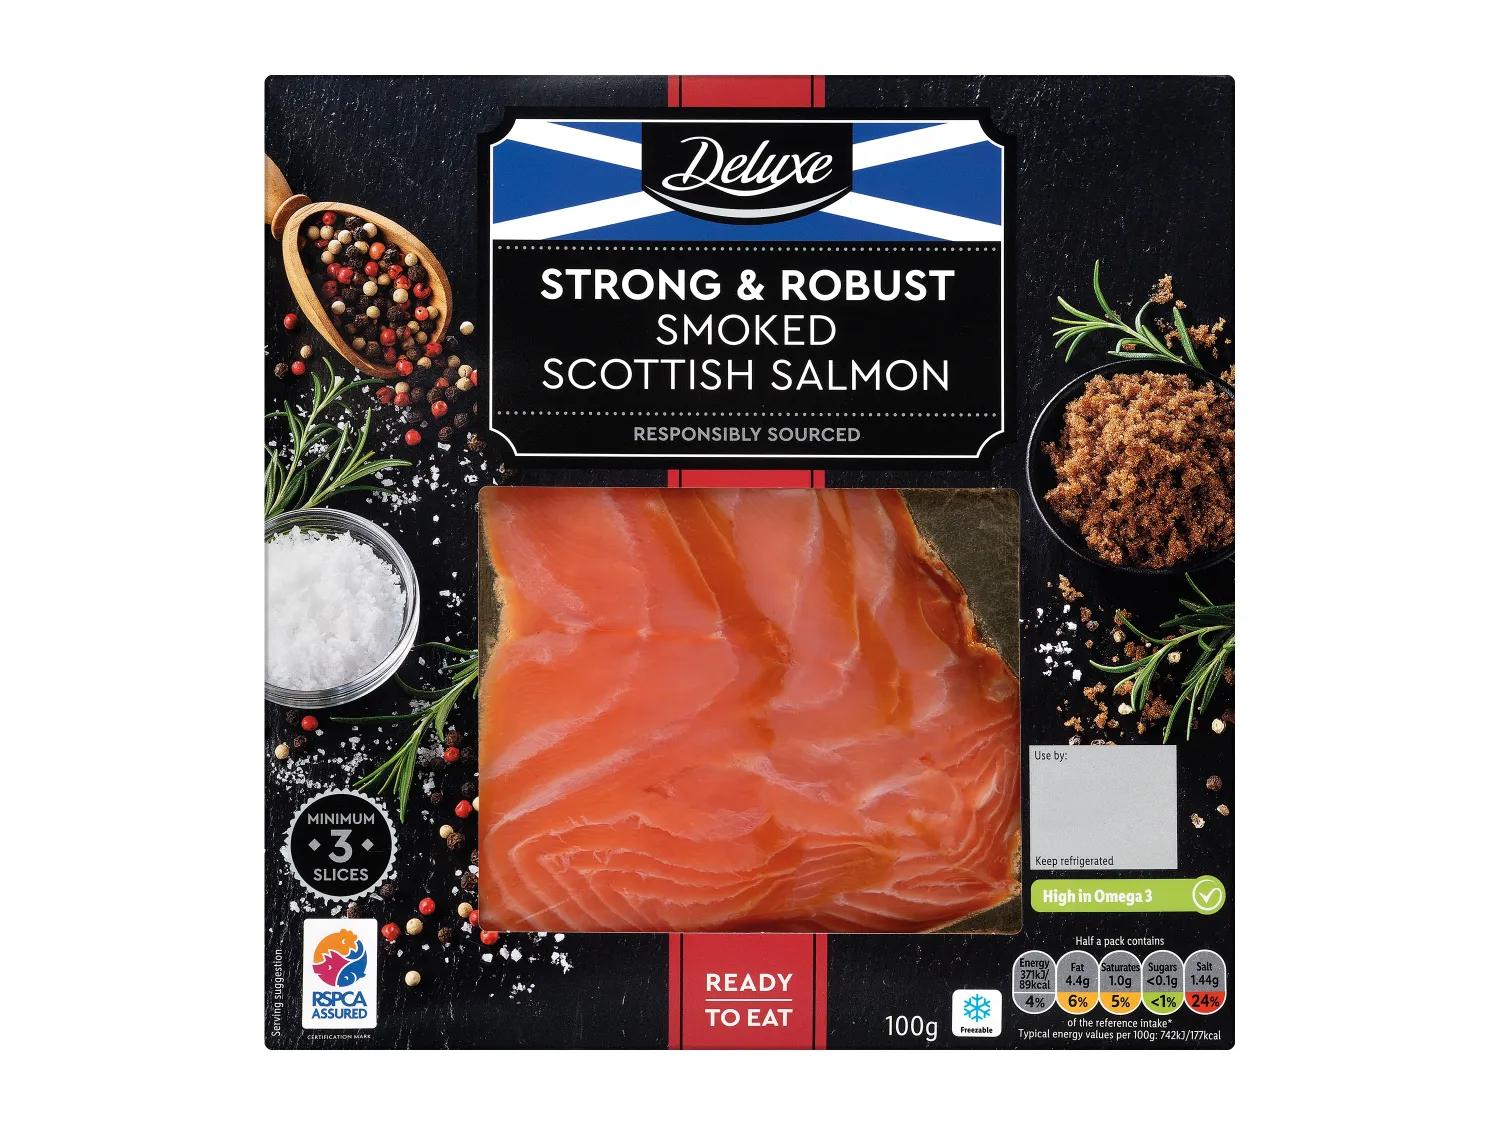 smoked salmon at lidl - Does Lidl have wild caught salmon